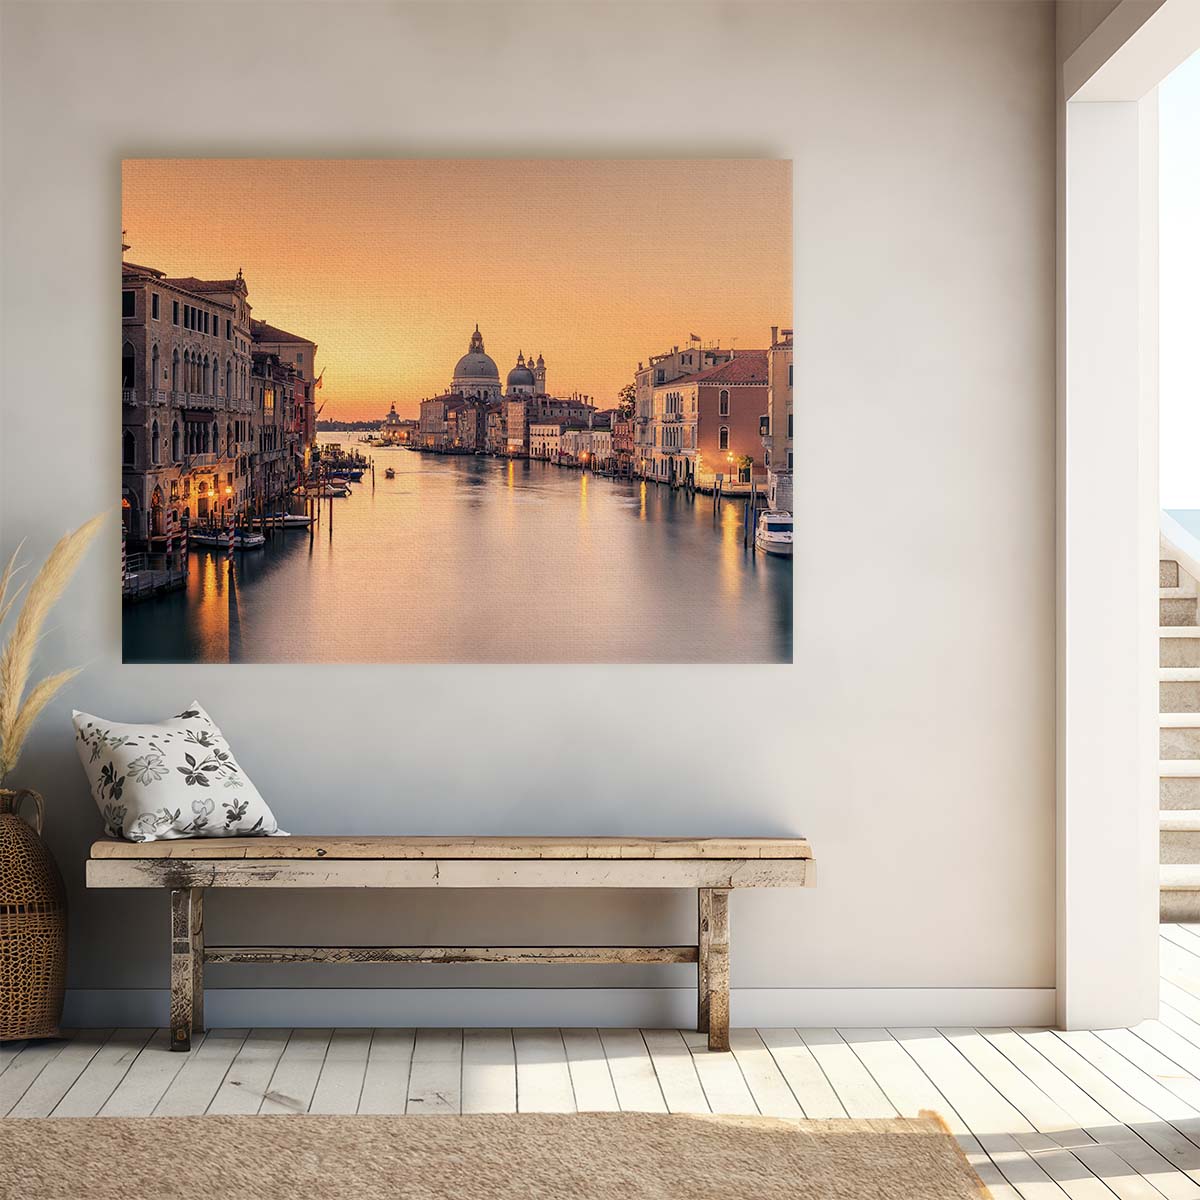 Venice Sunrise Historic Canals & Cityscape Wall Art by Luxuriance Designs. Made in USA.